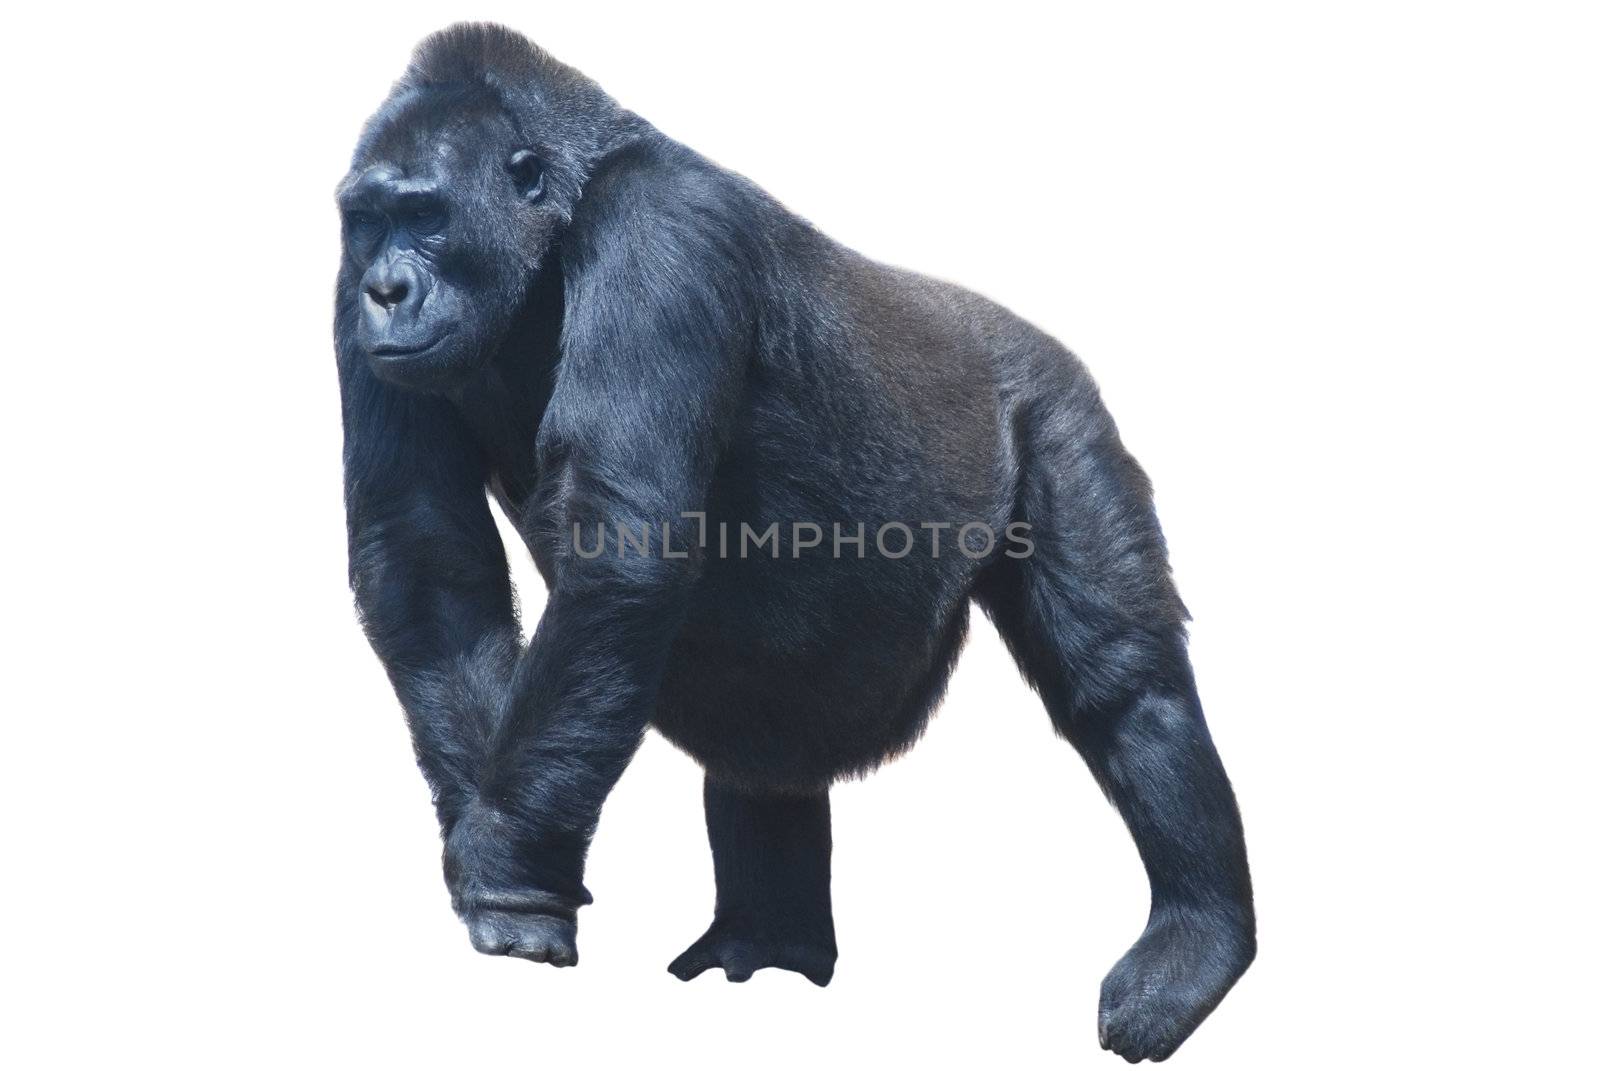 close up of a big black hairy gorilla isolated on white by svtrotof